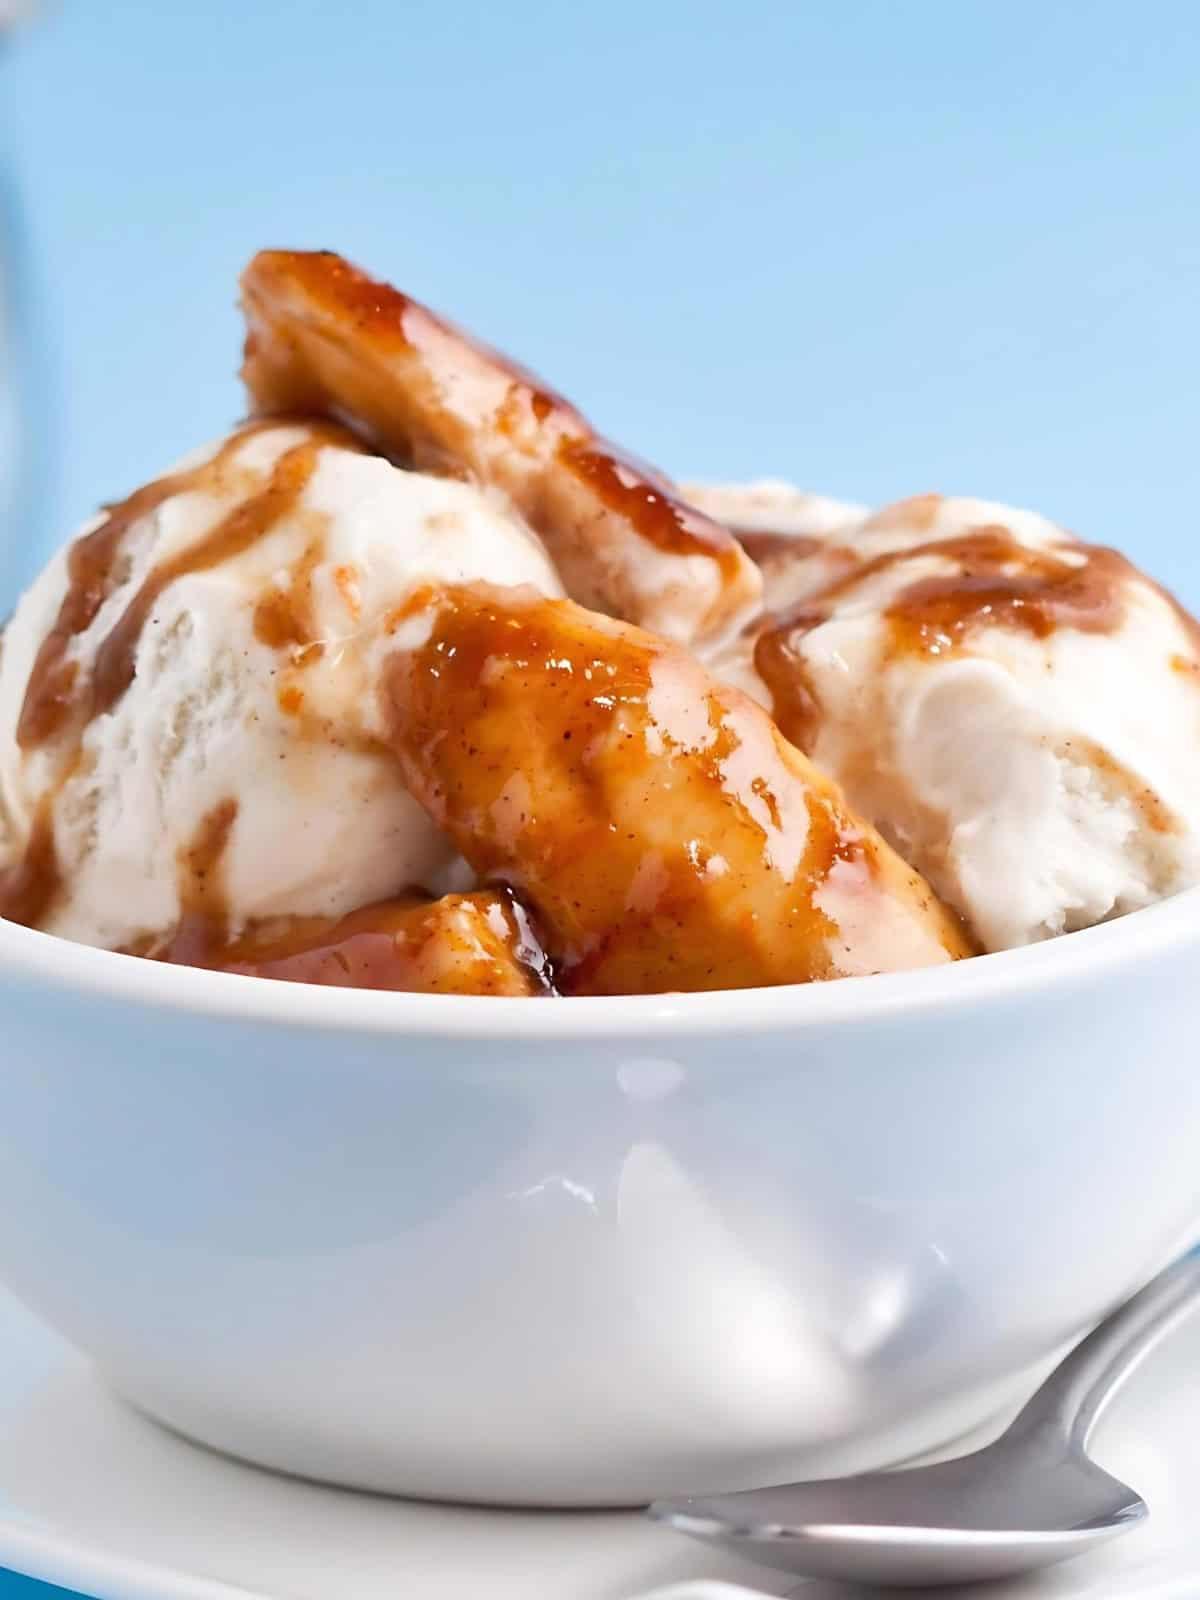 Banana foster in a bowl drizzled with caramel.